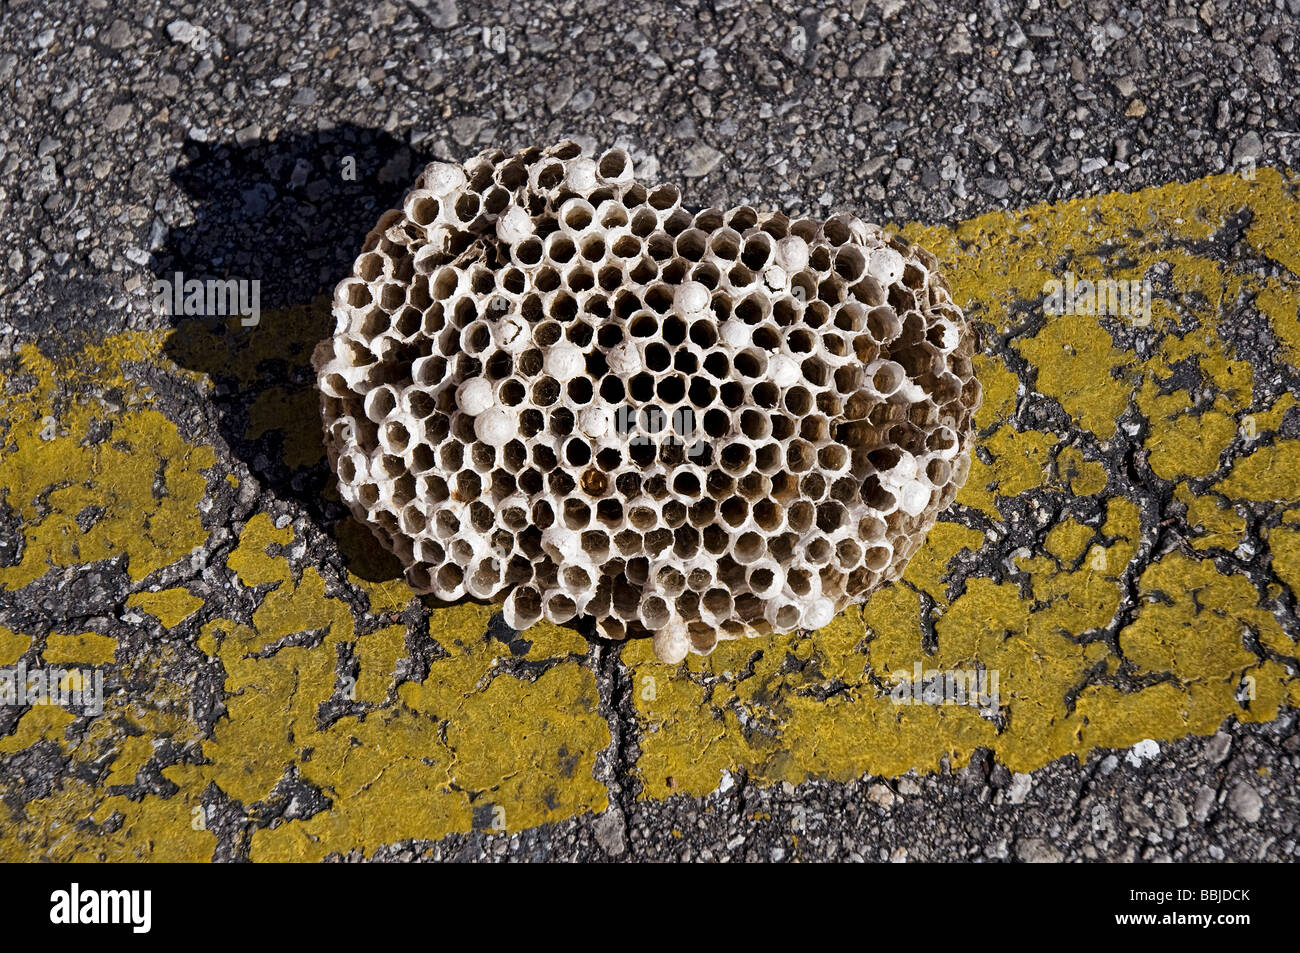 large wasp nest found in street along yellow stripe North Florida Stock Photo